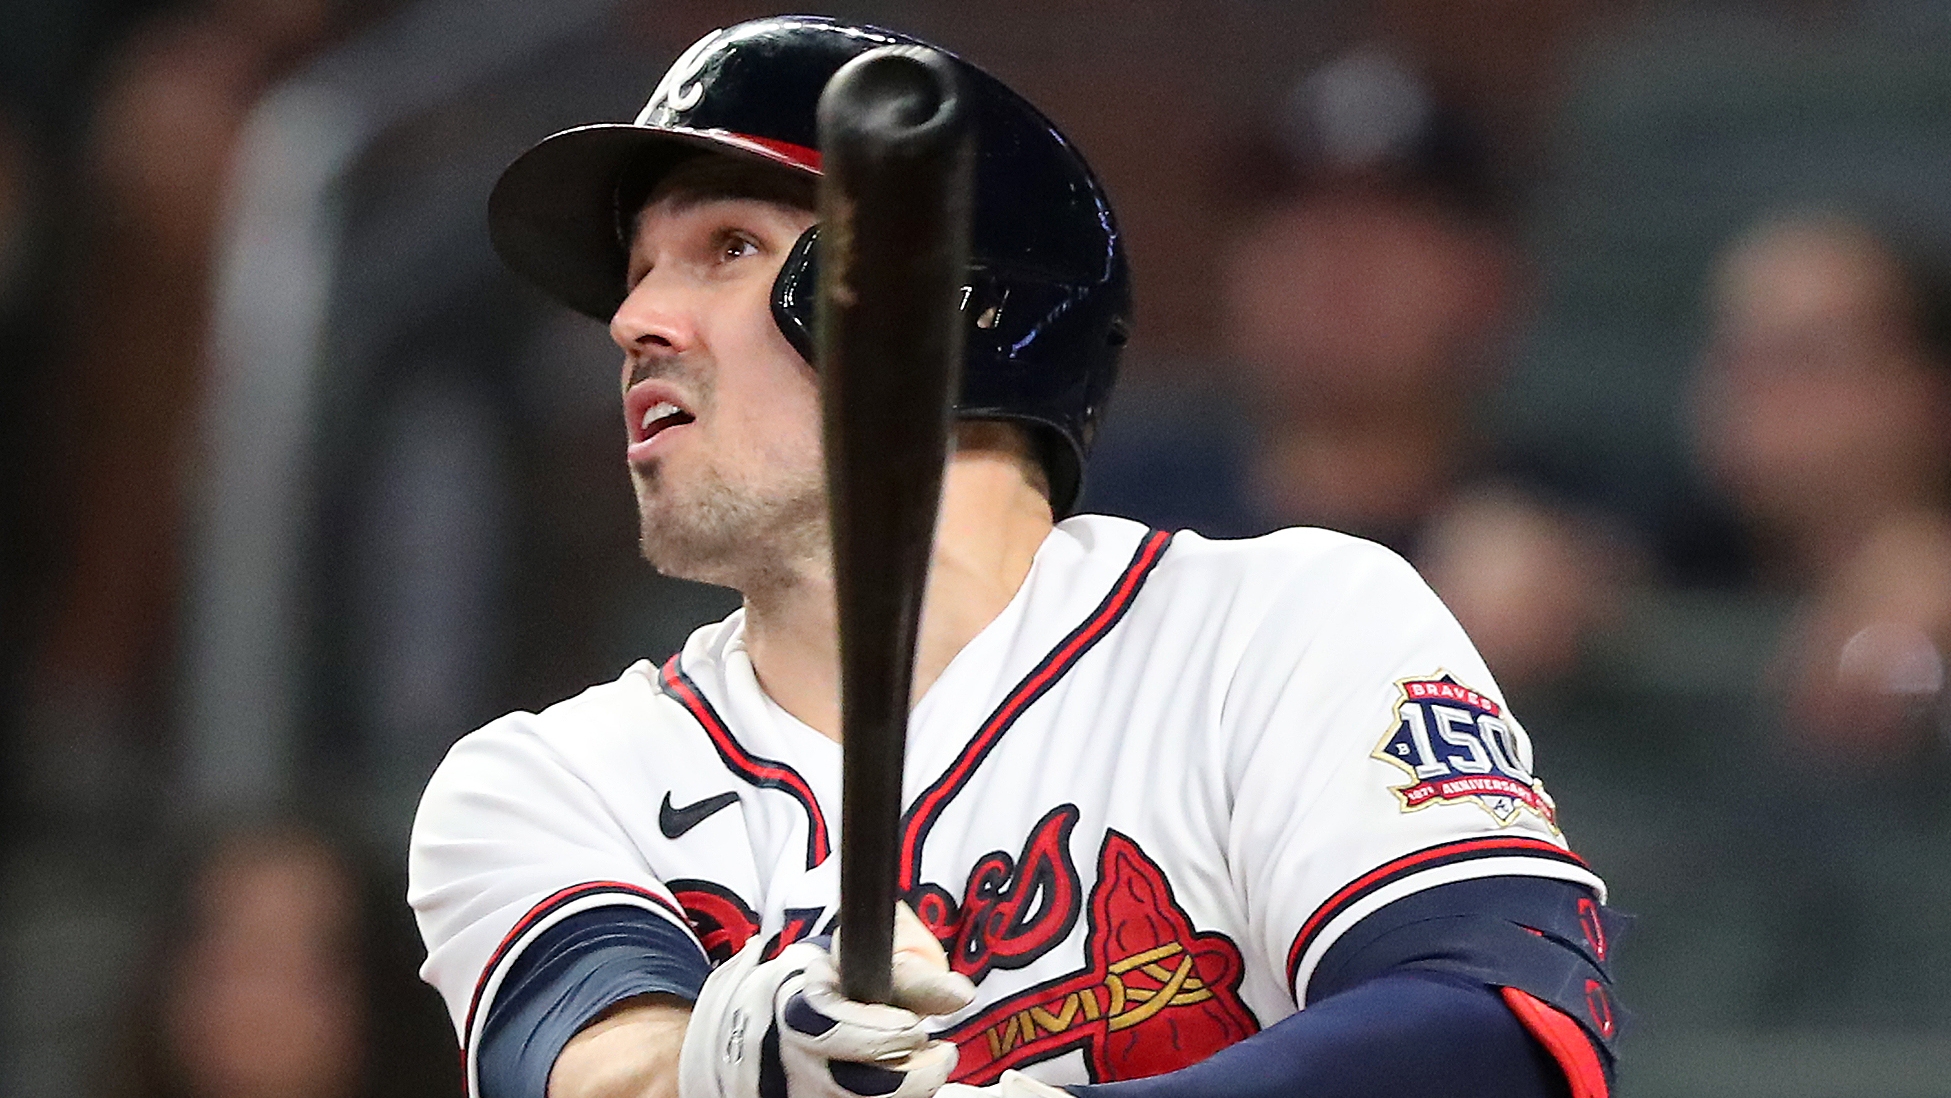 Adam Duvall overcomes all - and Braves are lucky he has